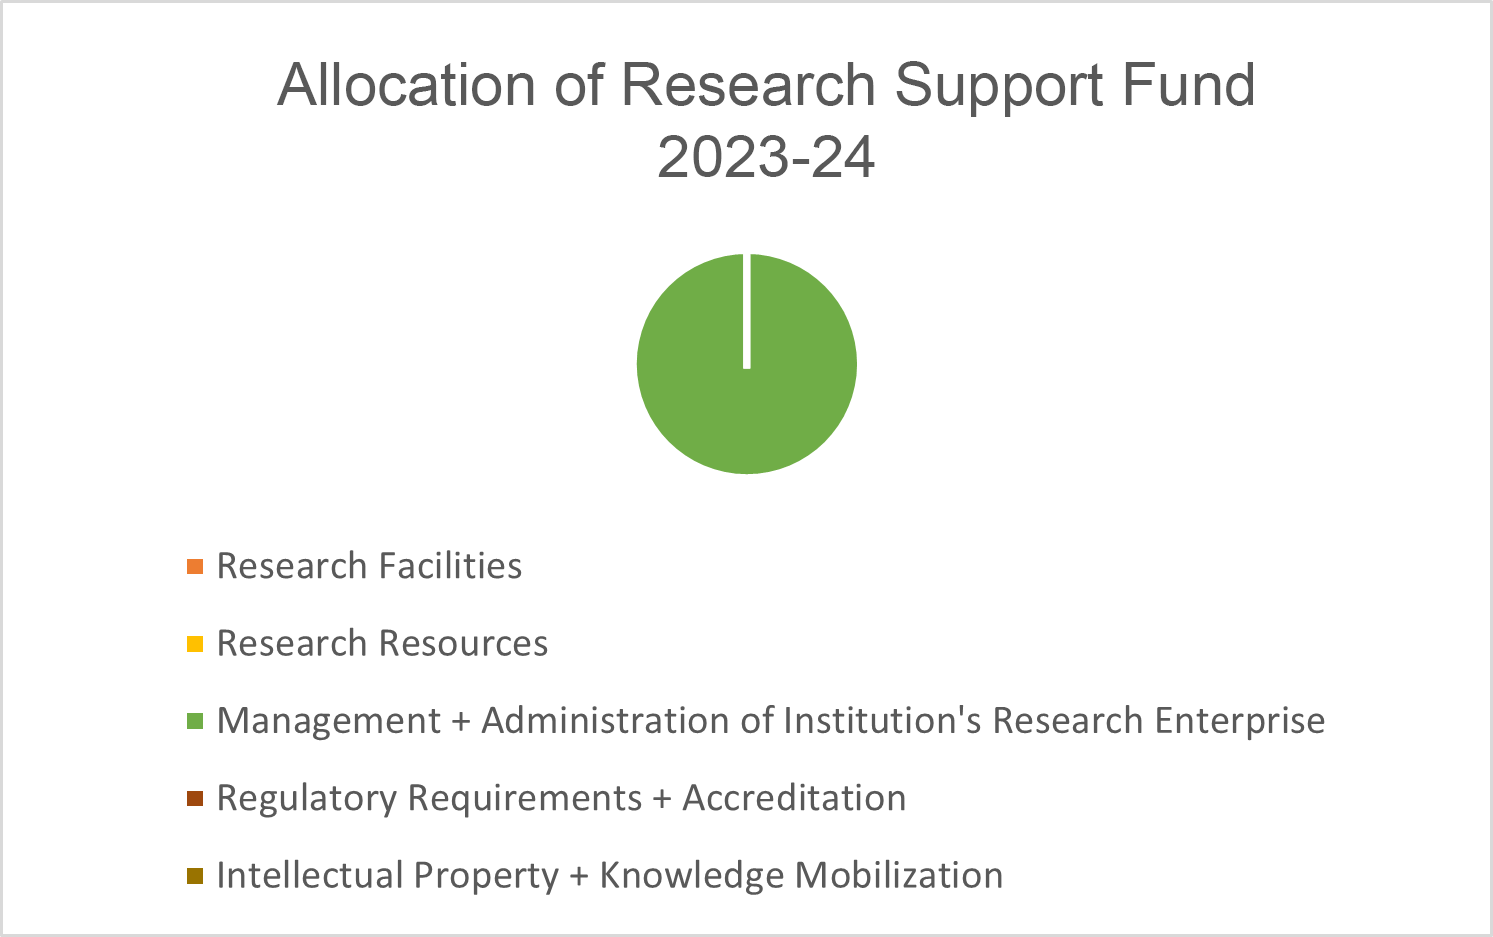 2023-24 Research Support Fund Allocation